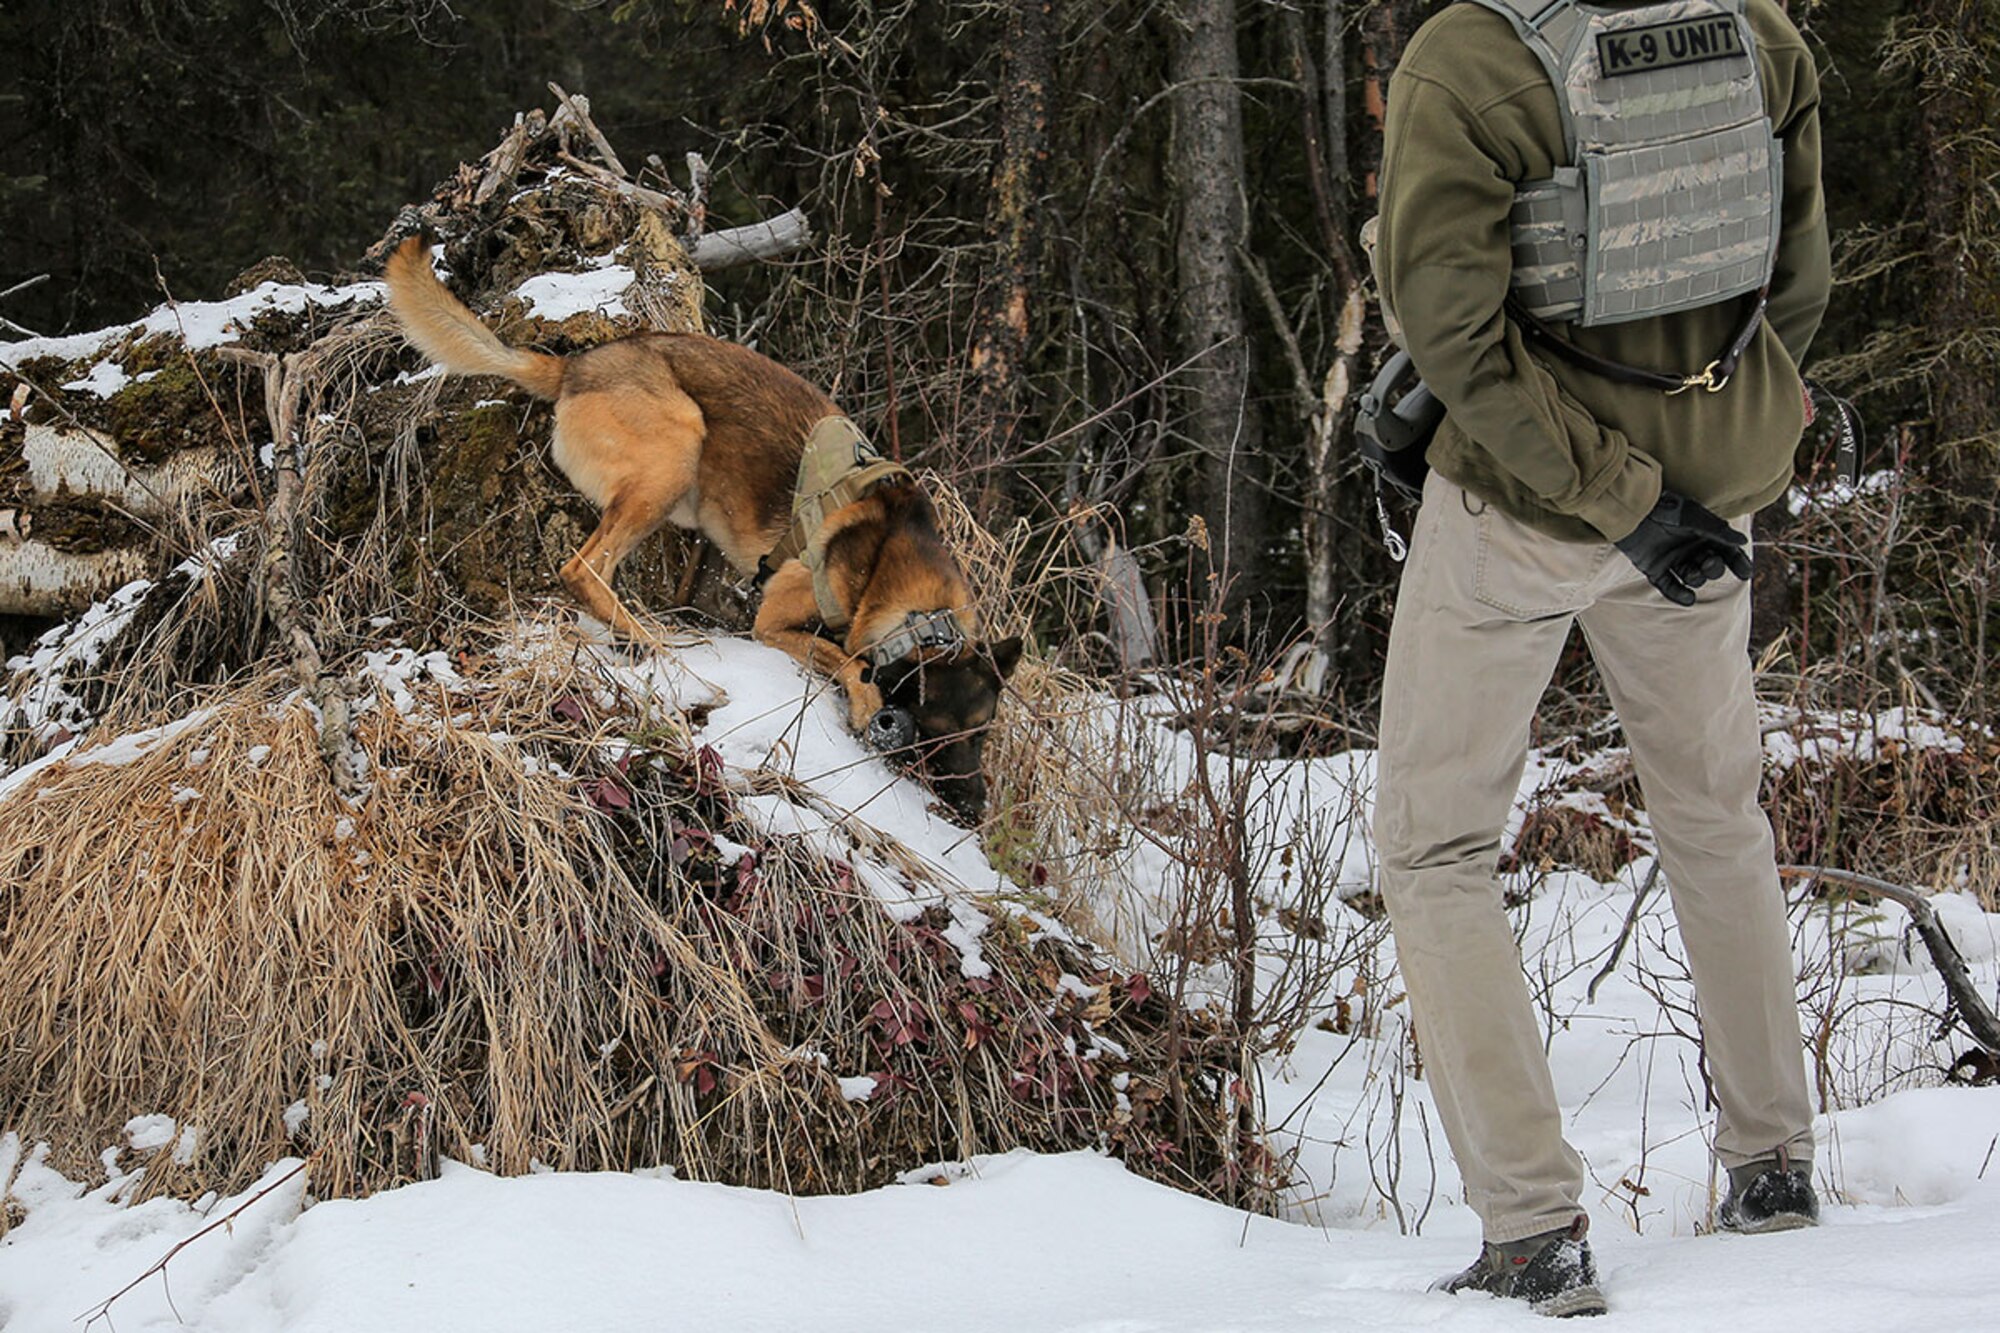 U.S. Air Force Staff Sgt. Joe Burns and military working dog, Ciko, assigned to the 673d Security Forces Squadron, practice searching for simulated hidden explosives while conducting K-9 training at Joint Base Elmendorf-Richardson, Alaska, March 17, 2016. Military working dog teams are trained to respond to various law enforcement emergencies as well as detect hidden narcotics and explosives. (U.S. Air Force photo/Alejandro Peña)